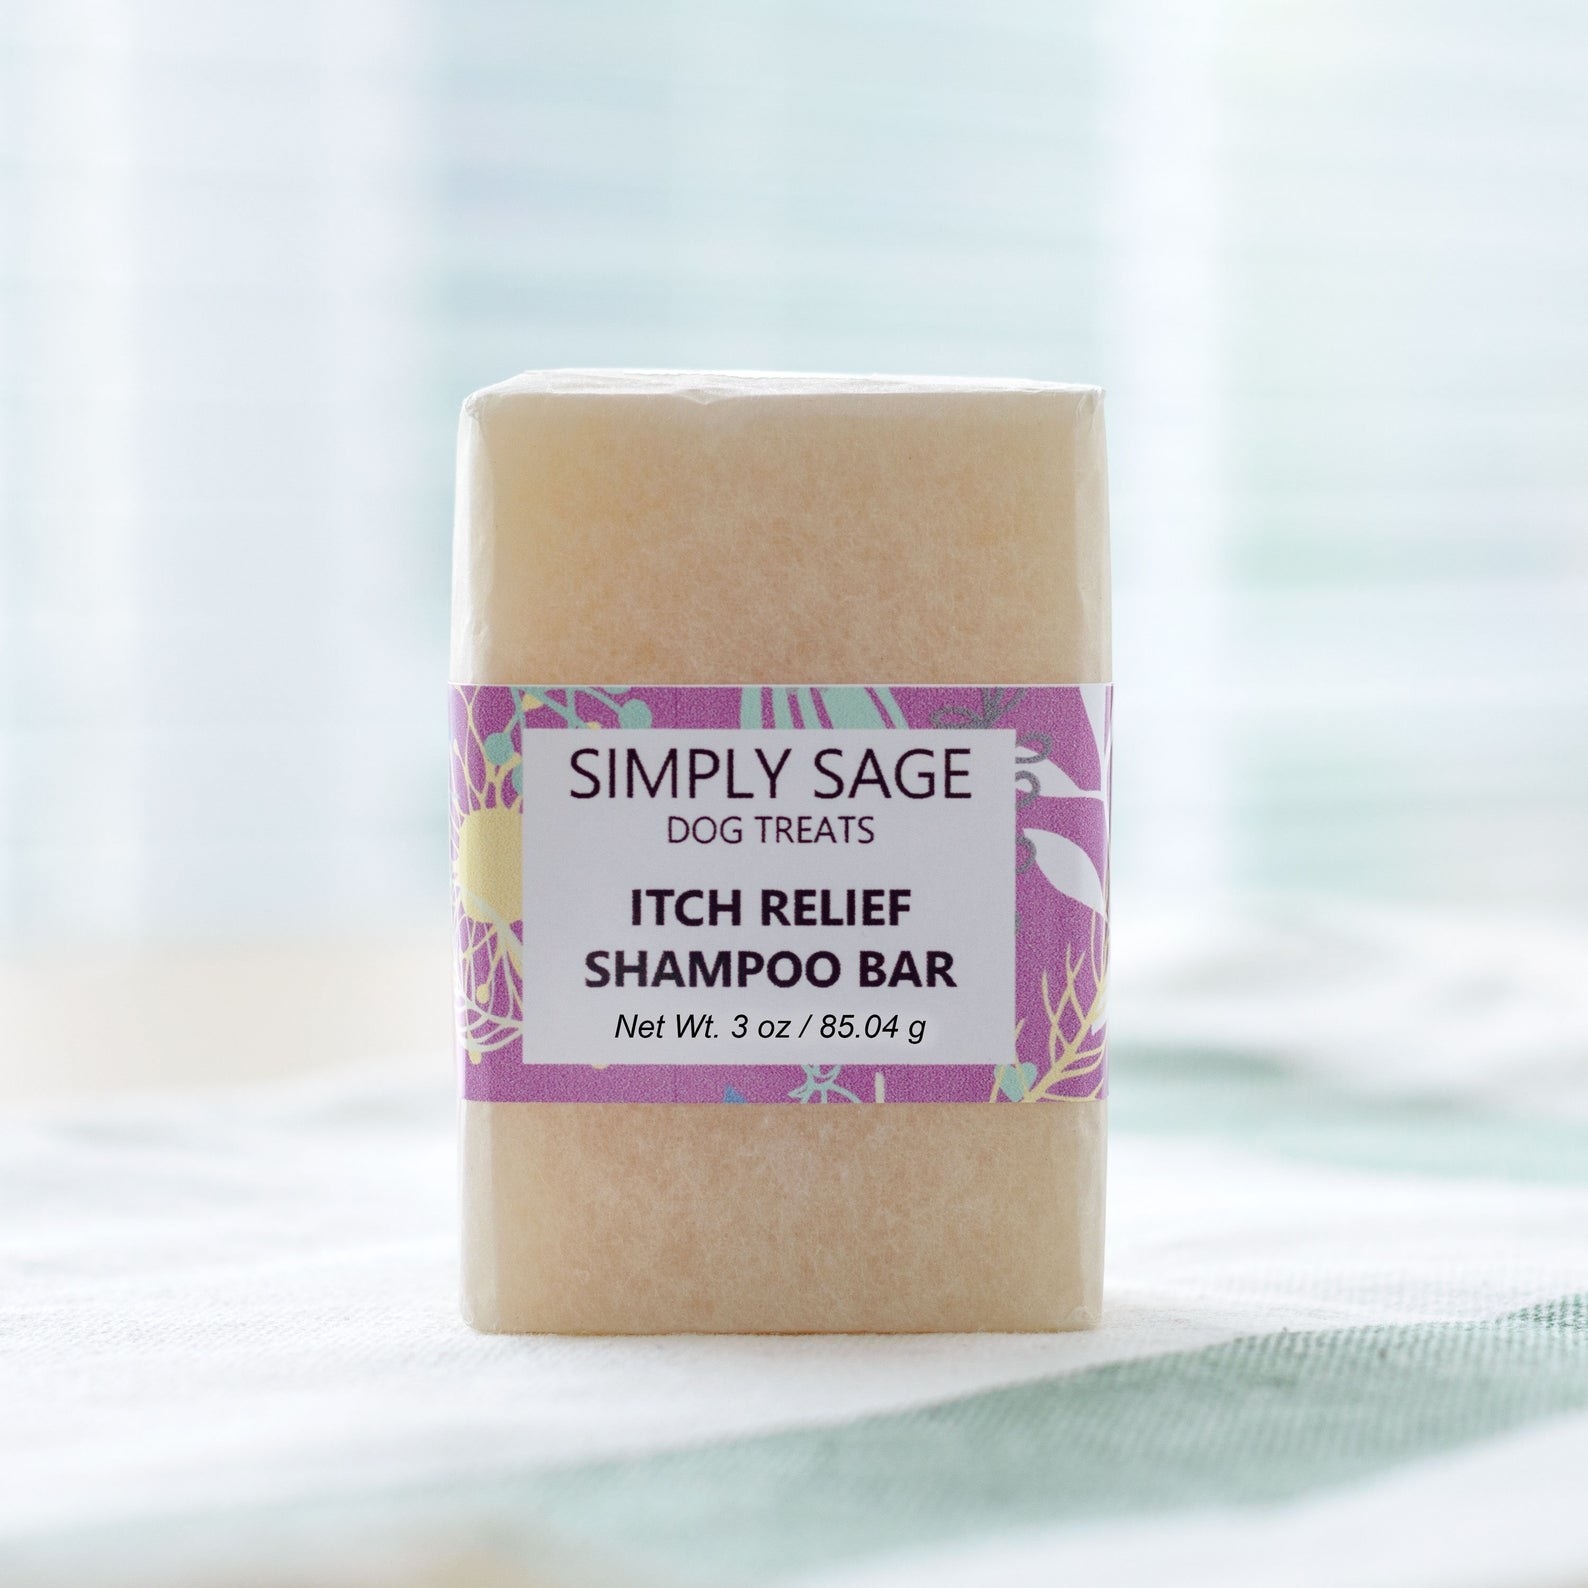 The bar of soap with a label that says &quot;Itch Relief Shampoo Bar&quot; and the shop name